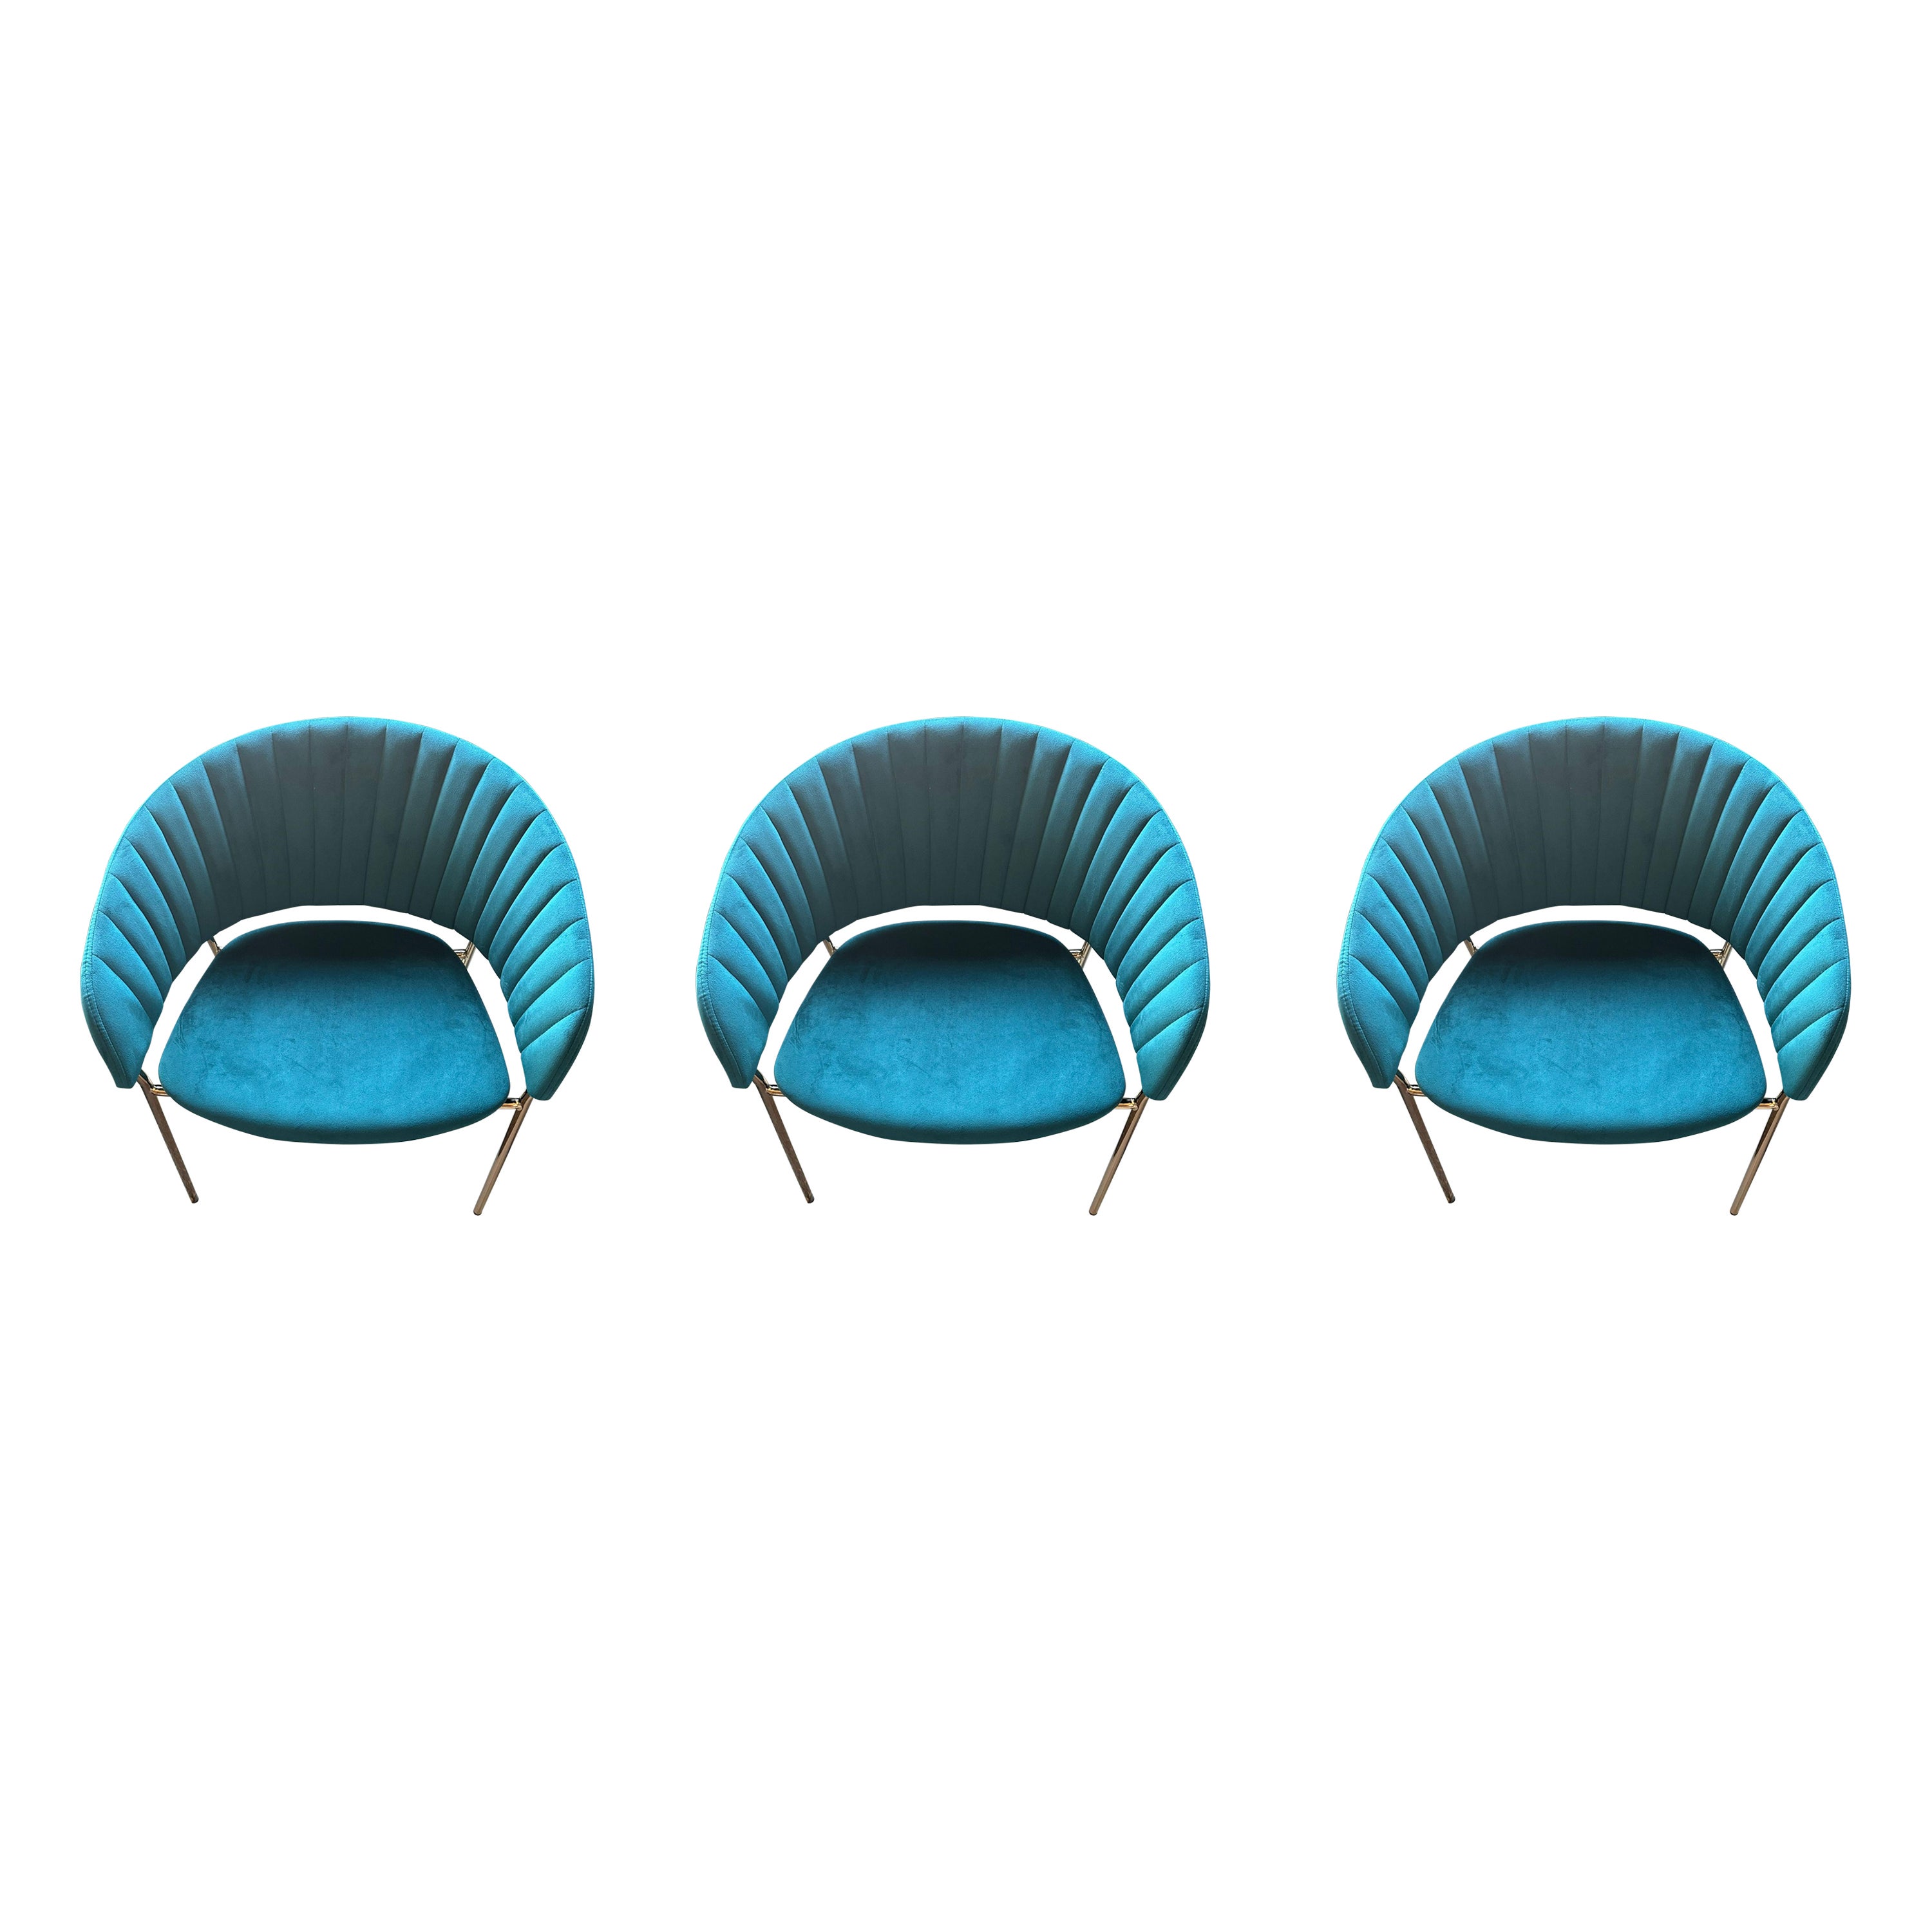 Tree New Spanish Chairs in Blue " Pavo Real " For Sale